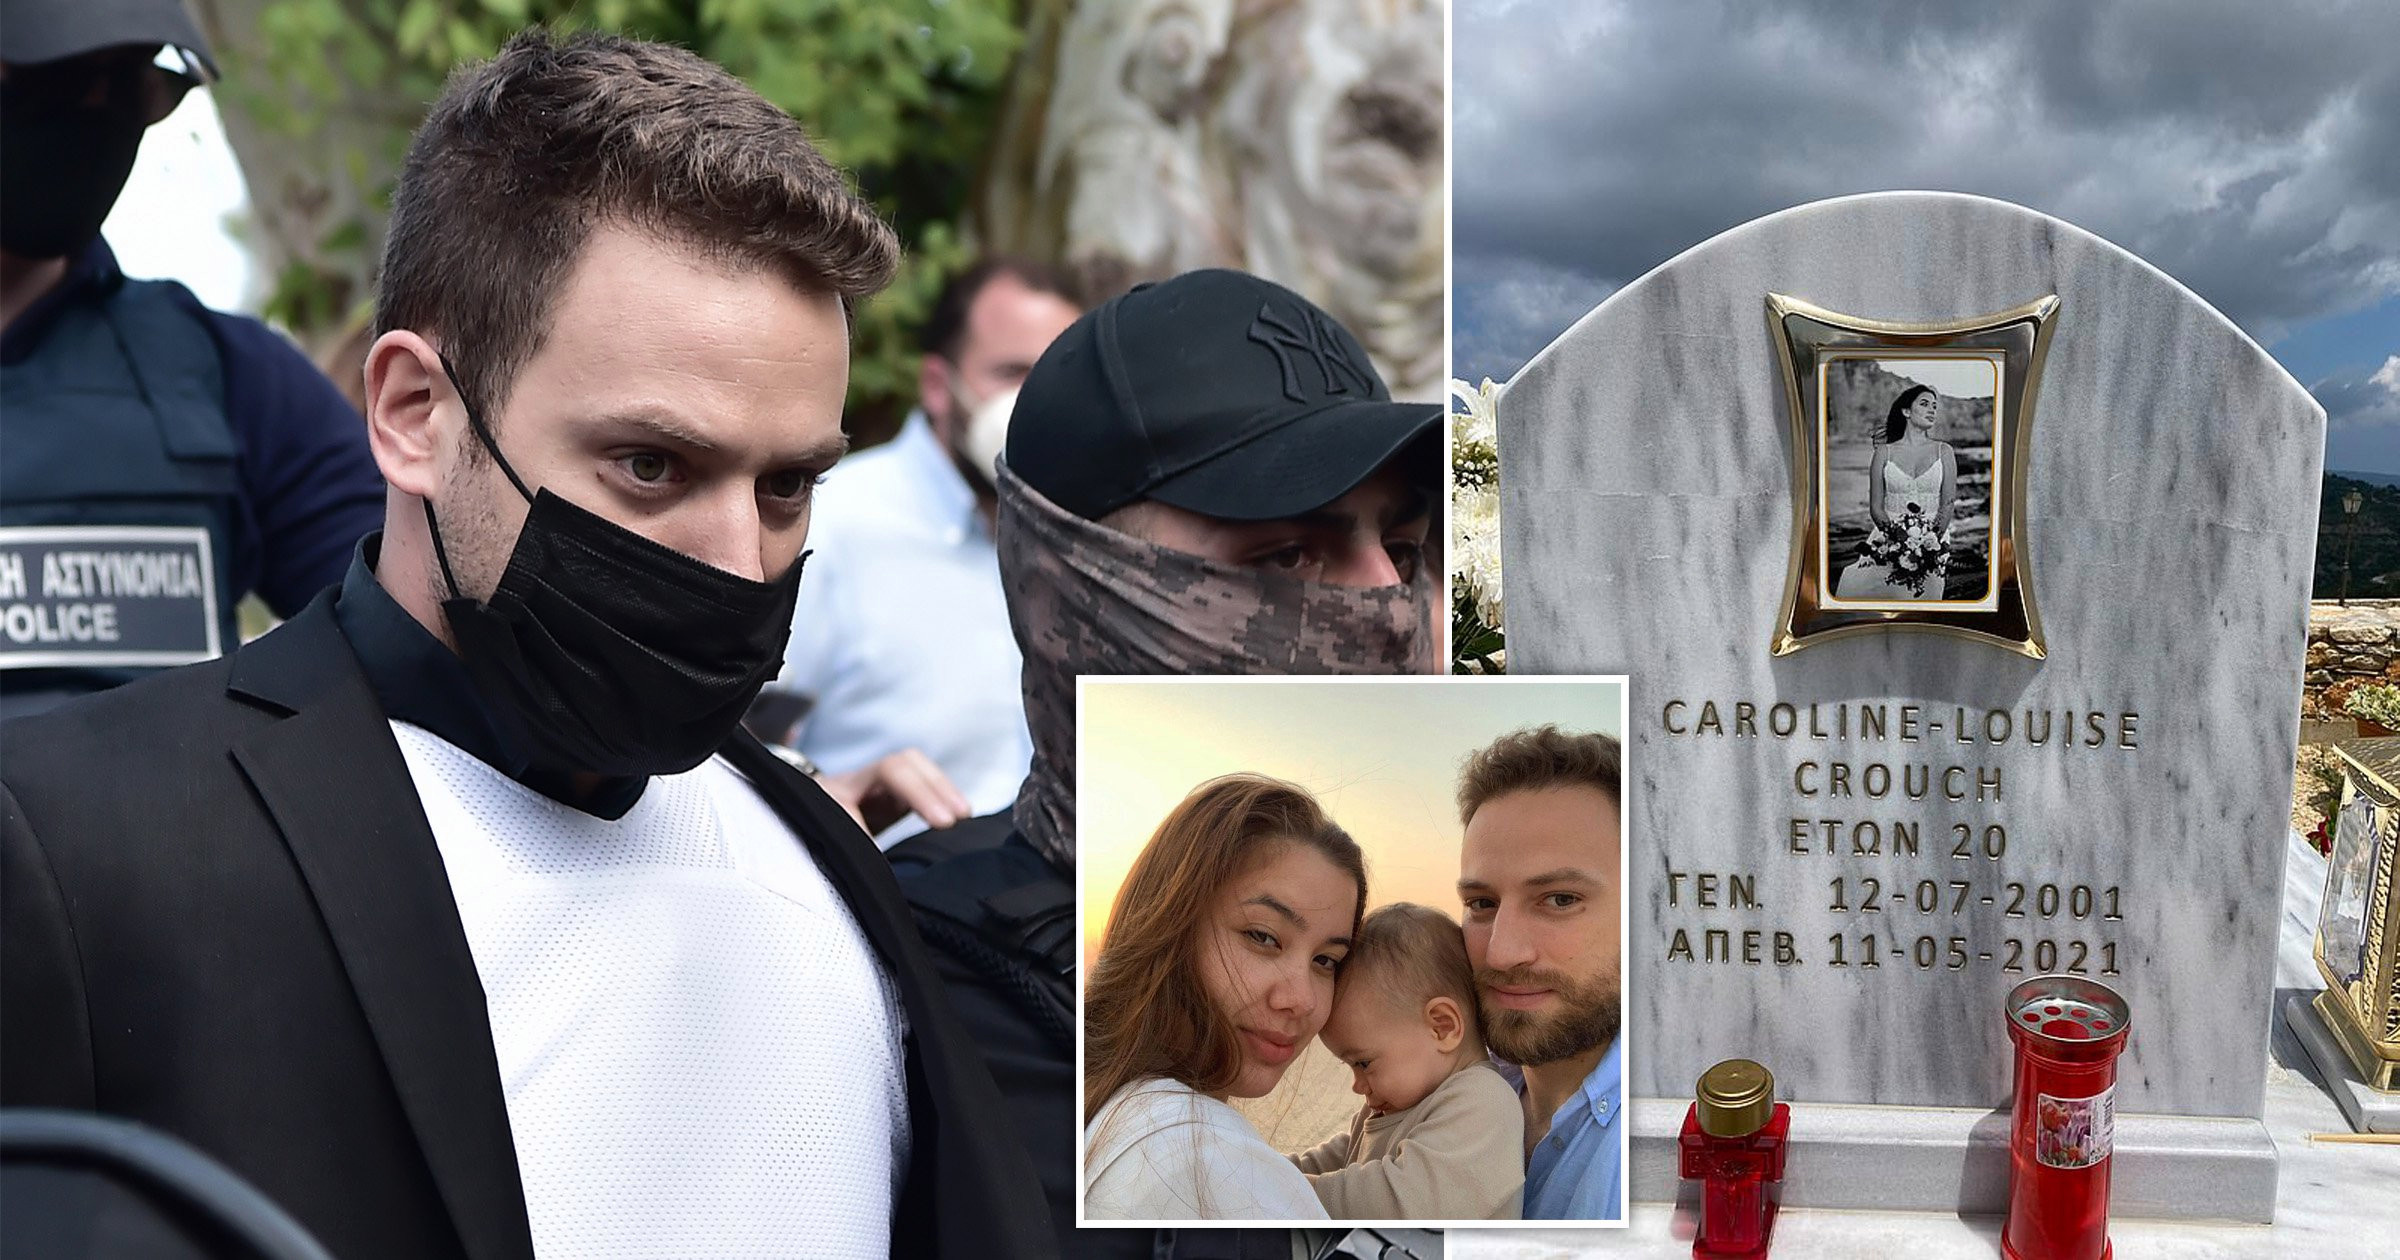 Wedding photo may be removed from wife’s grave as husband admits smothering her